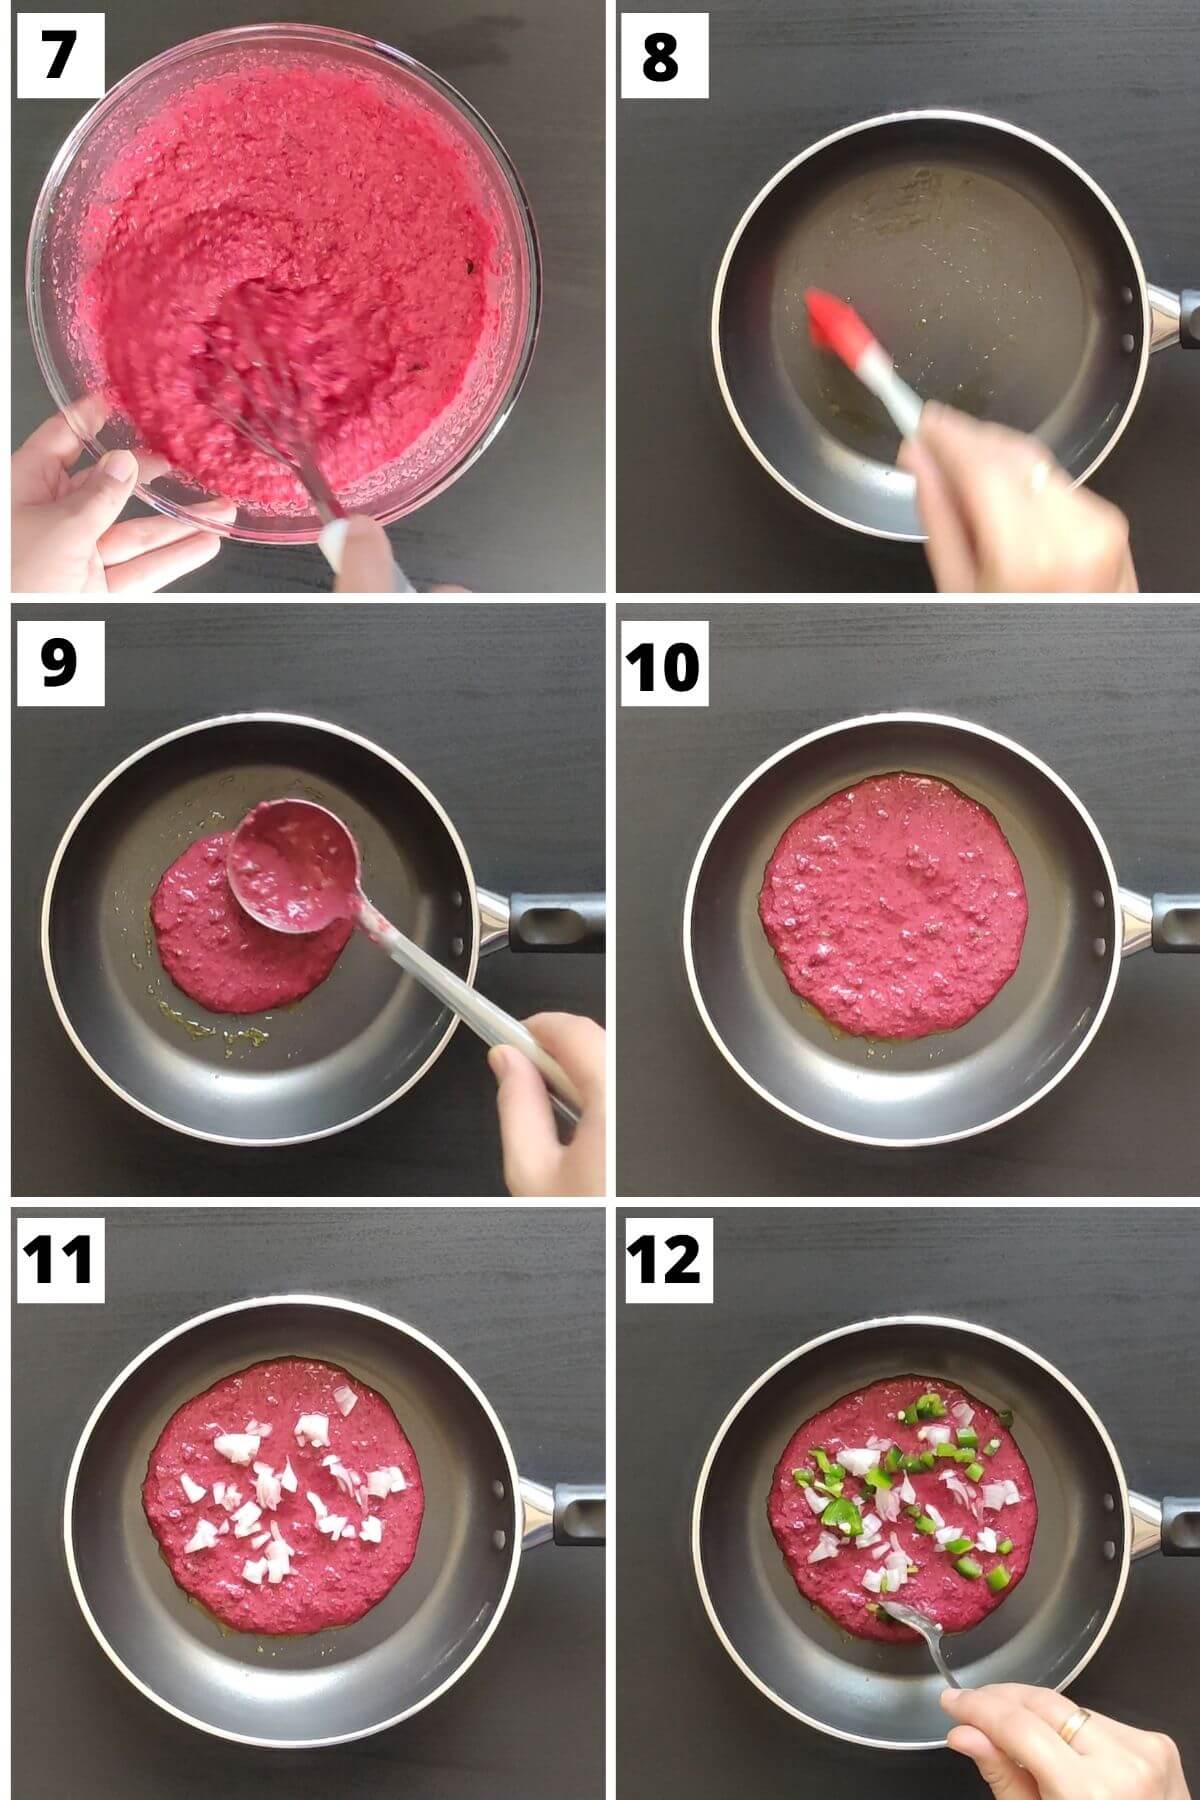 Steps 7 to 12 for making beetroot chilla